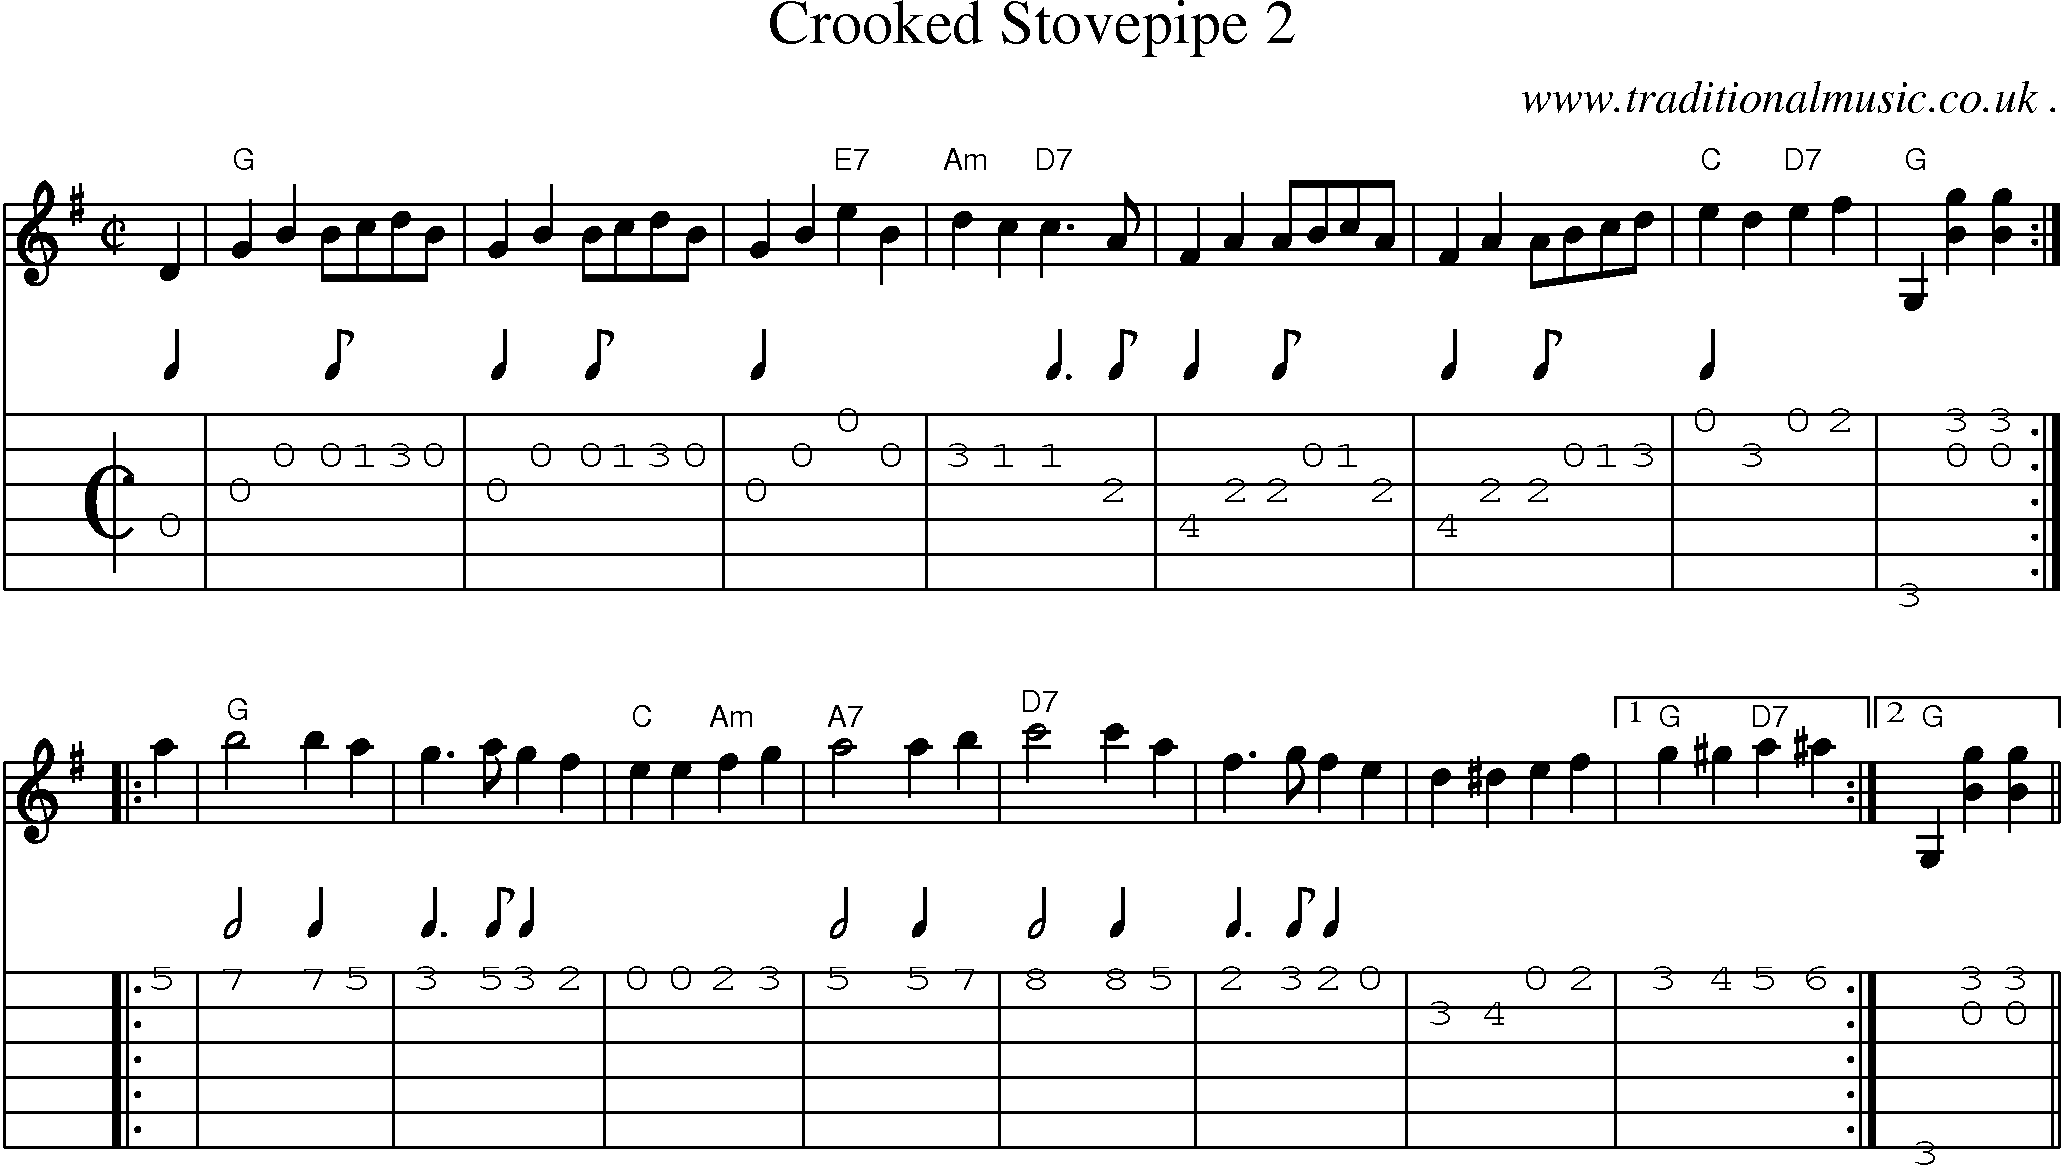 Music Score and Guitar Tabs for Crooked Stovepipe 2